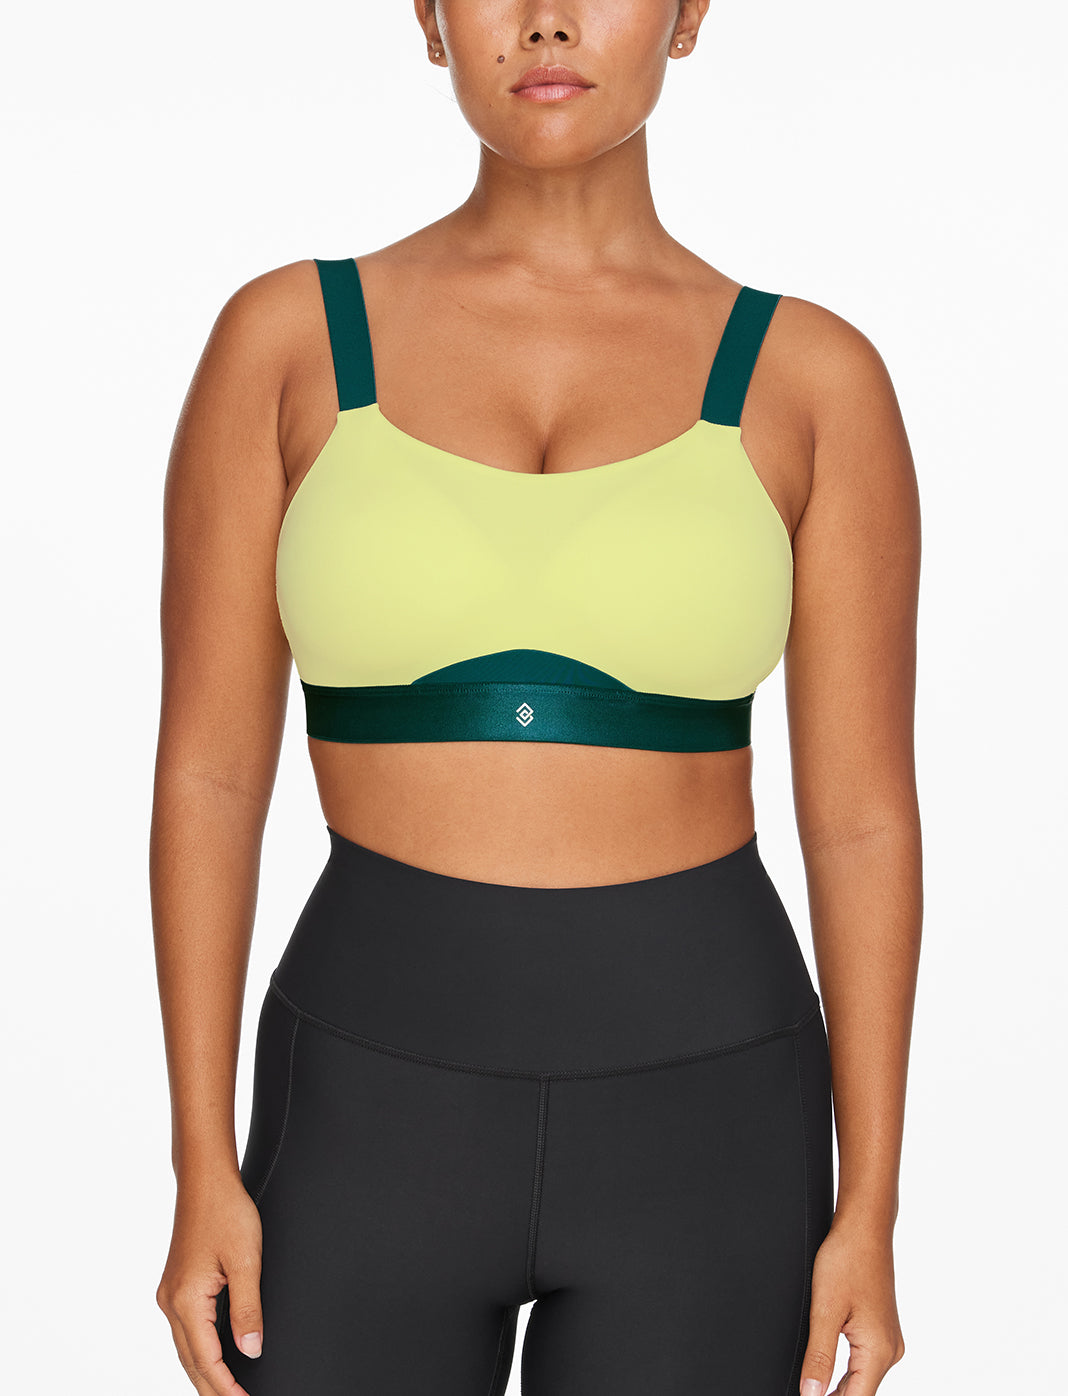 Wholesale Women Strapless Top Quick-Dry Fitness Gym Yoga